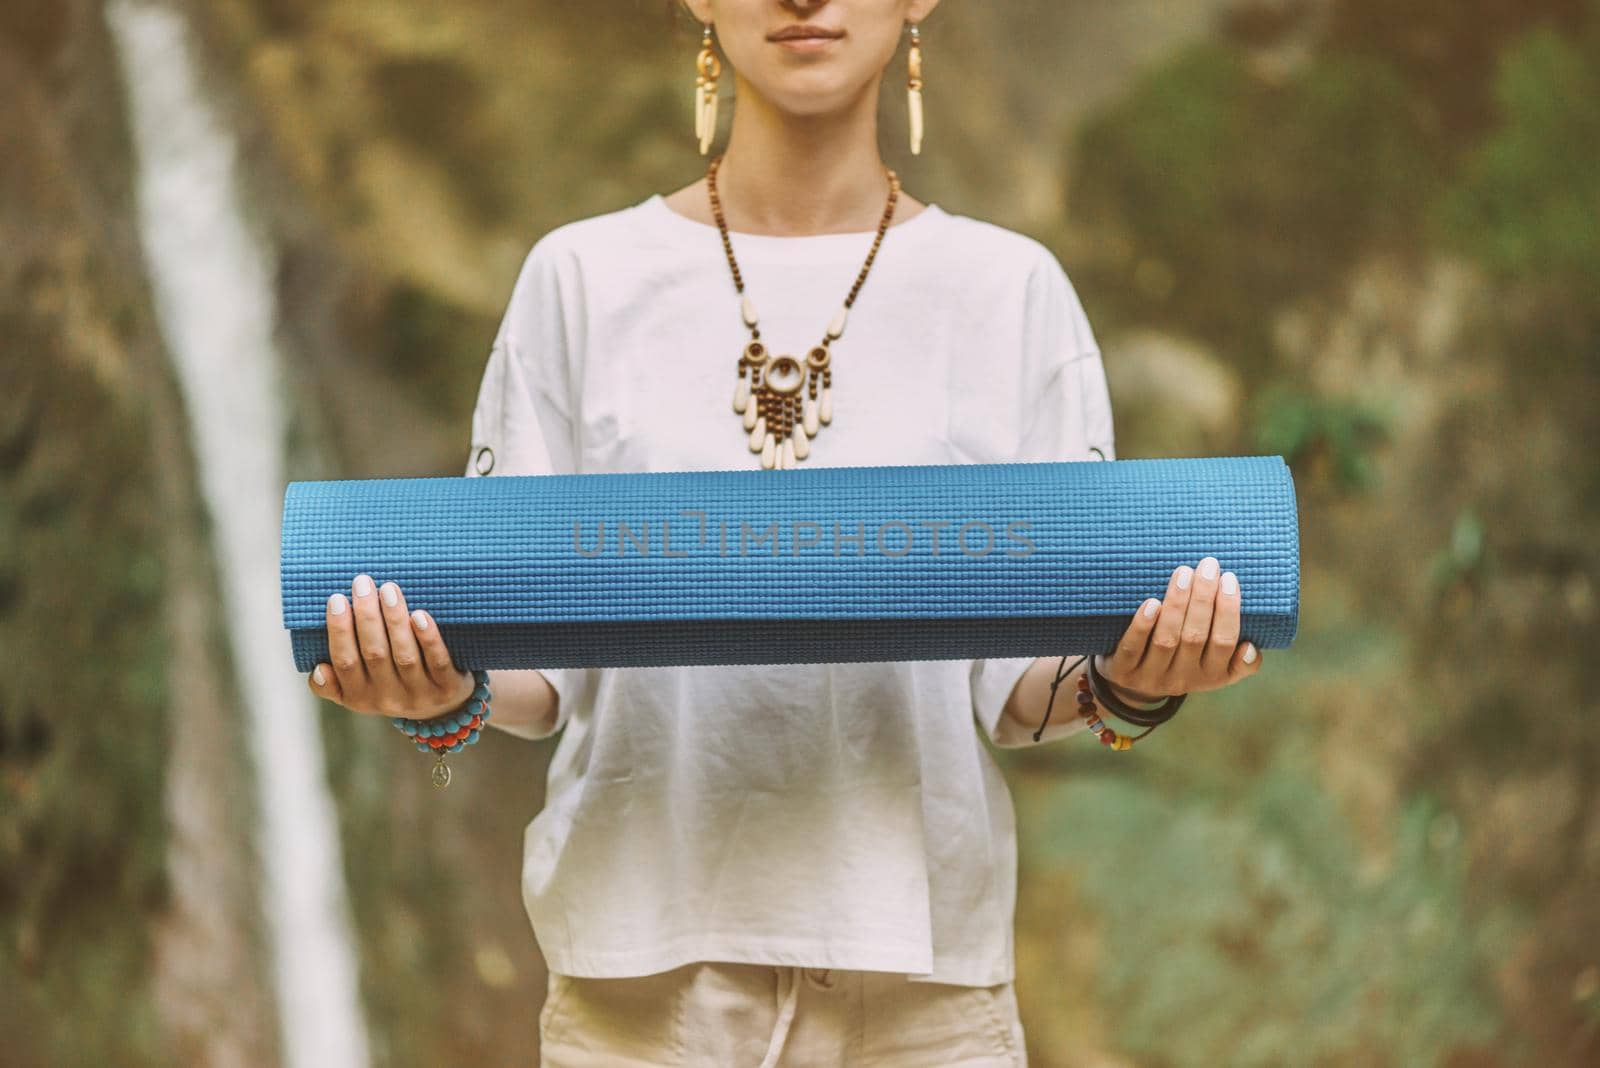 Young woman standing with yoga mat in summer outdoor.